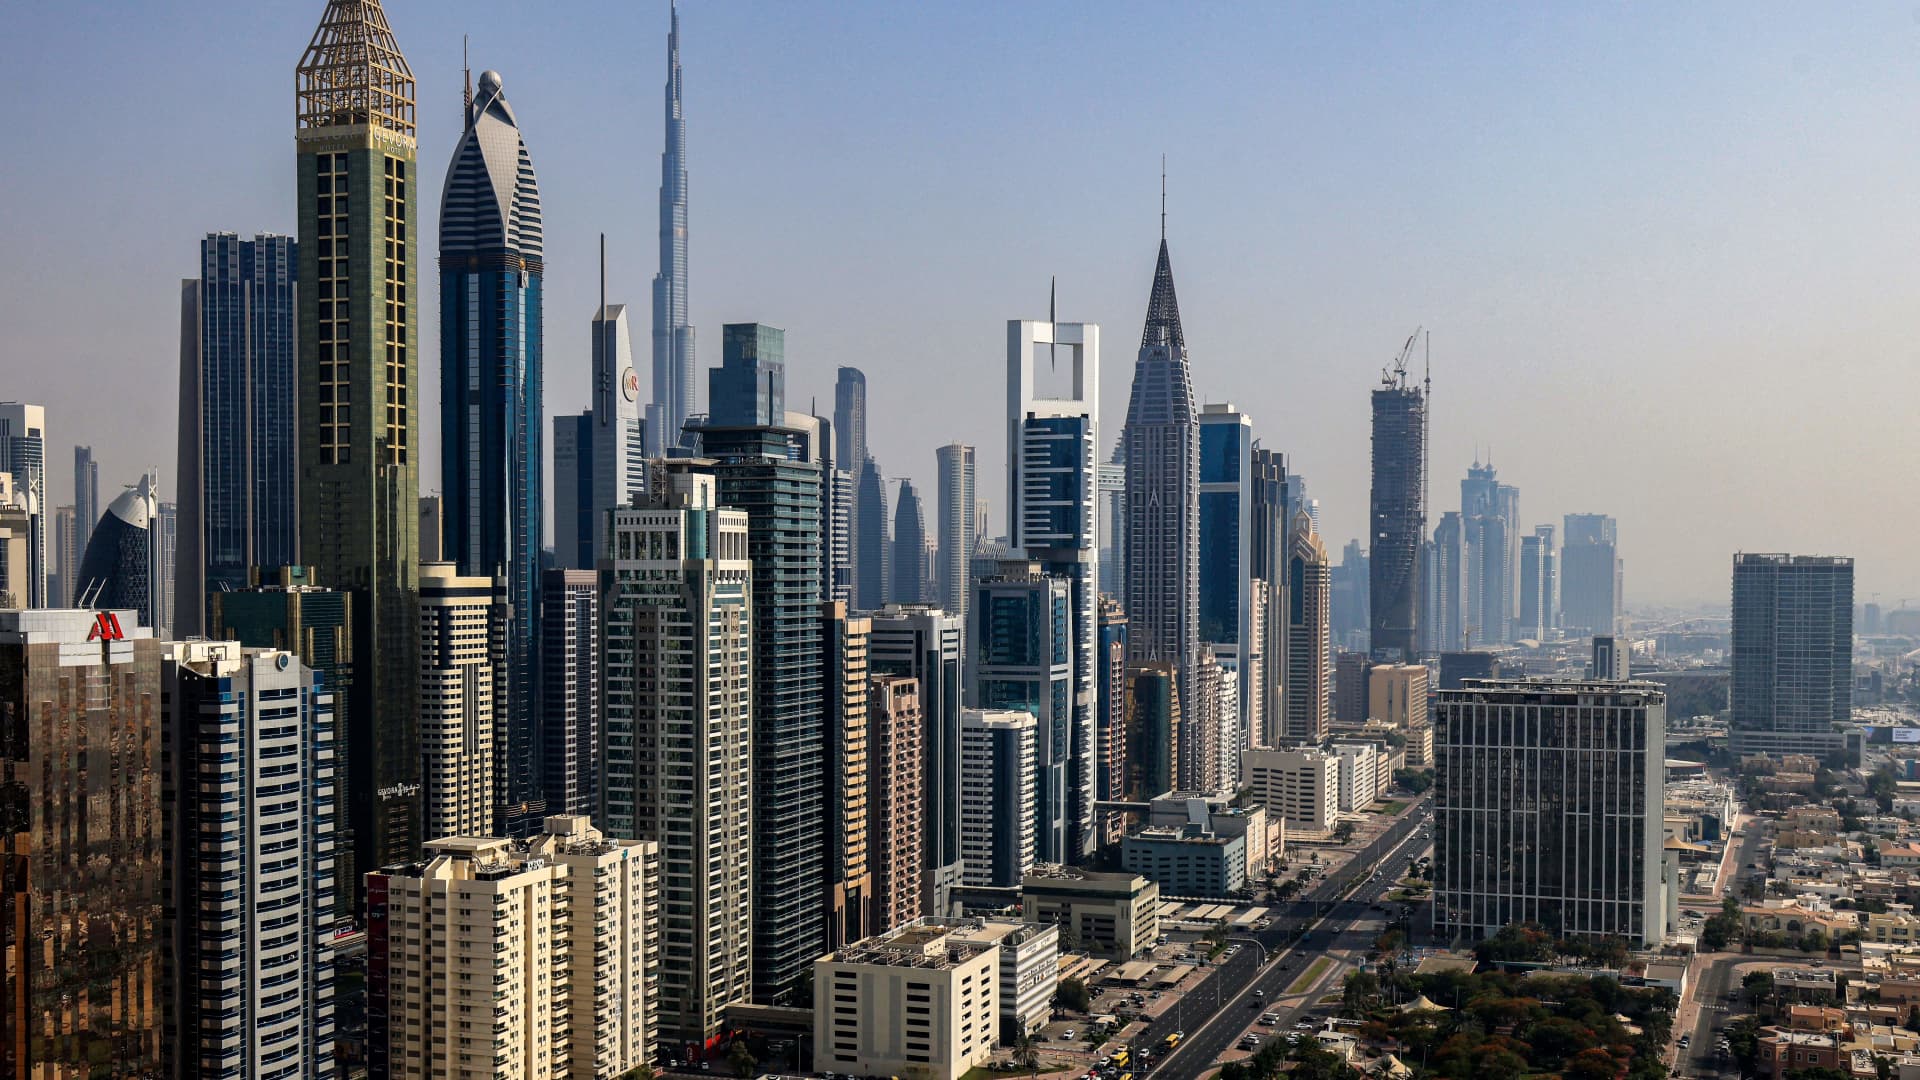 Dubai luxury home prices soar by almost 50%, with Tokyo’s up 26%. Here’s where other cities stand